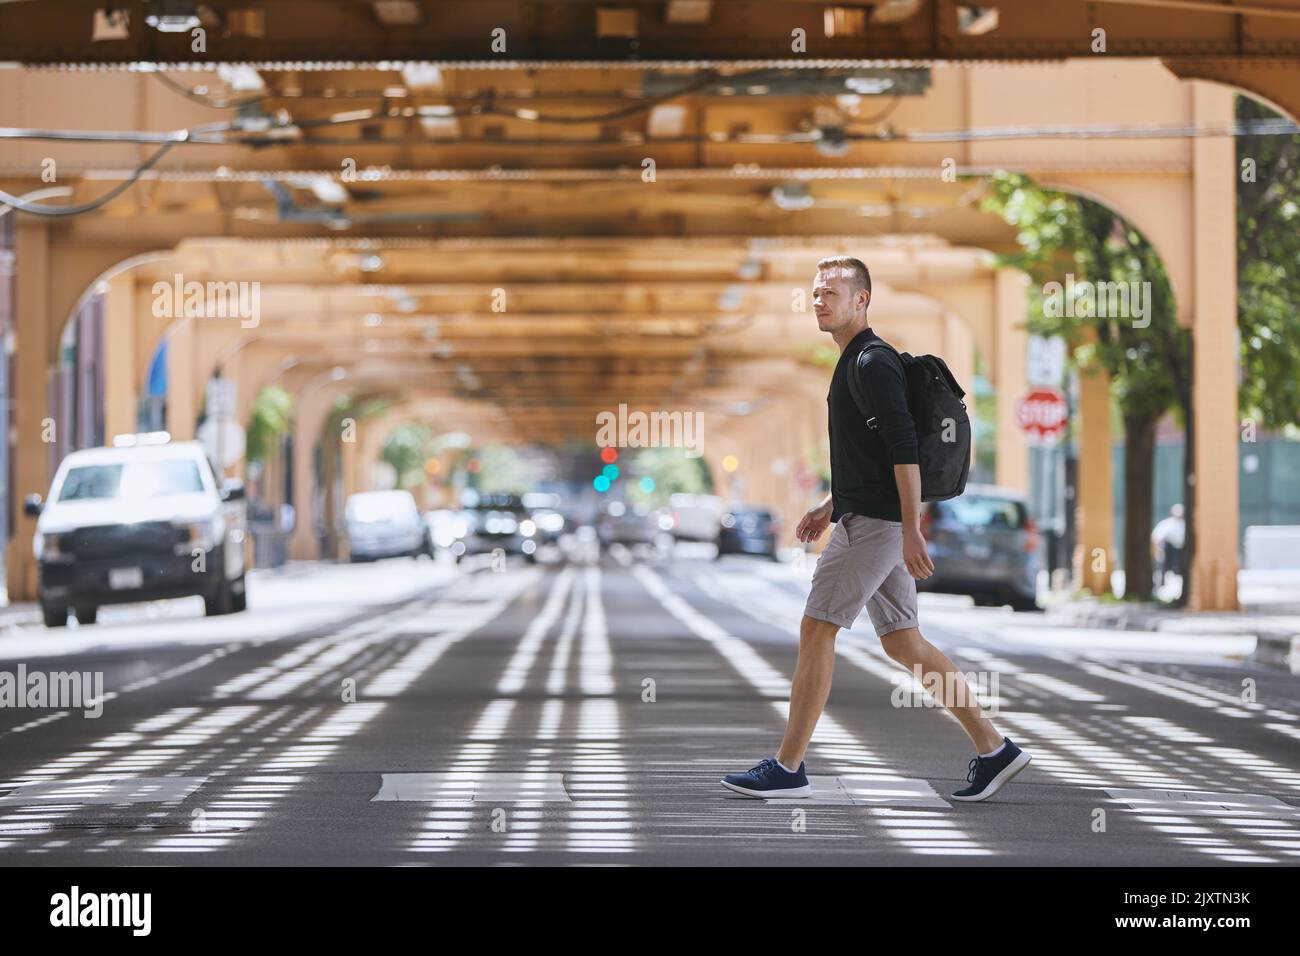 Side view of adult man with backpack walking on pedestrian crosswalk uder elevated railway of public transportation. Chicago, United States Stock Photo